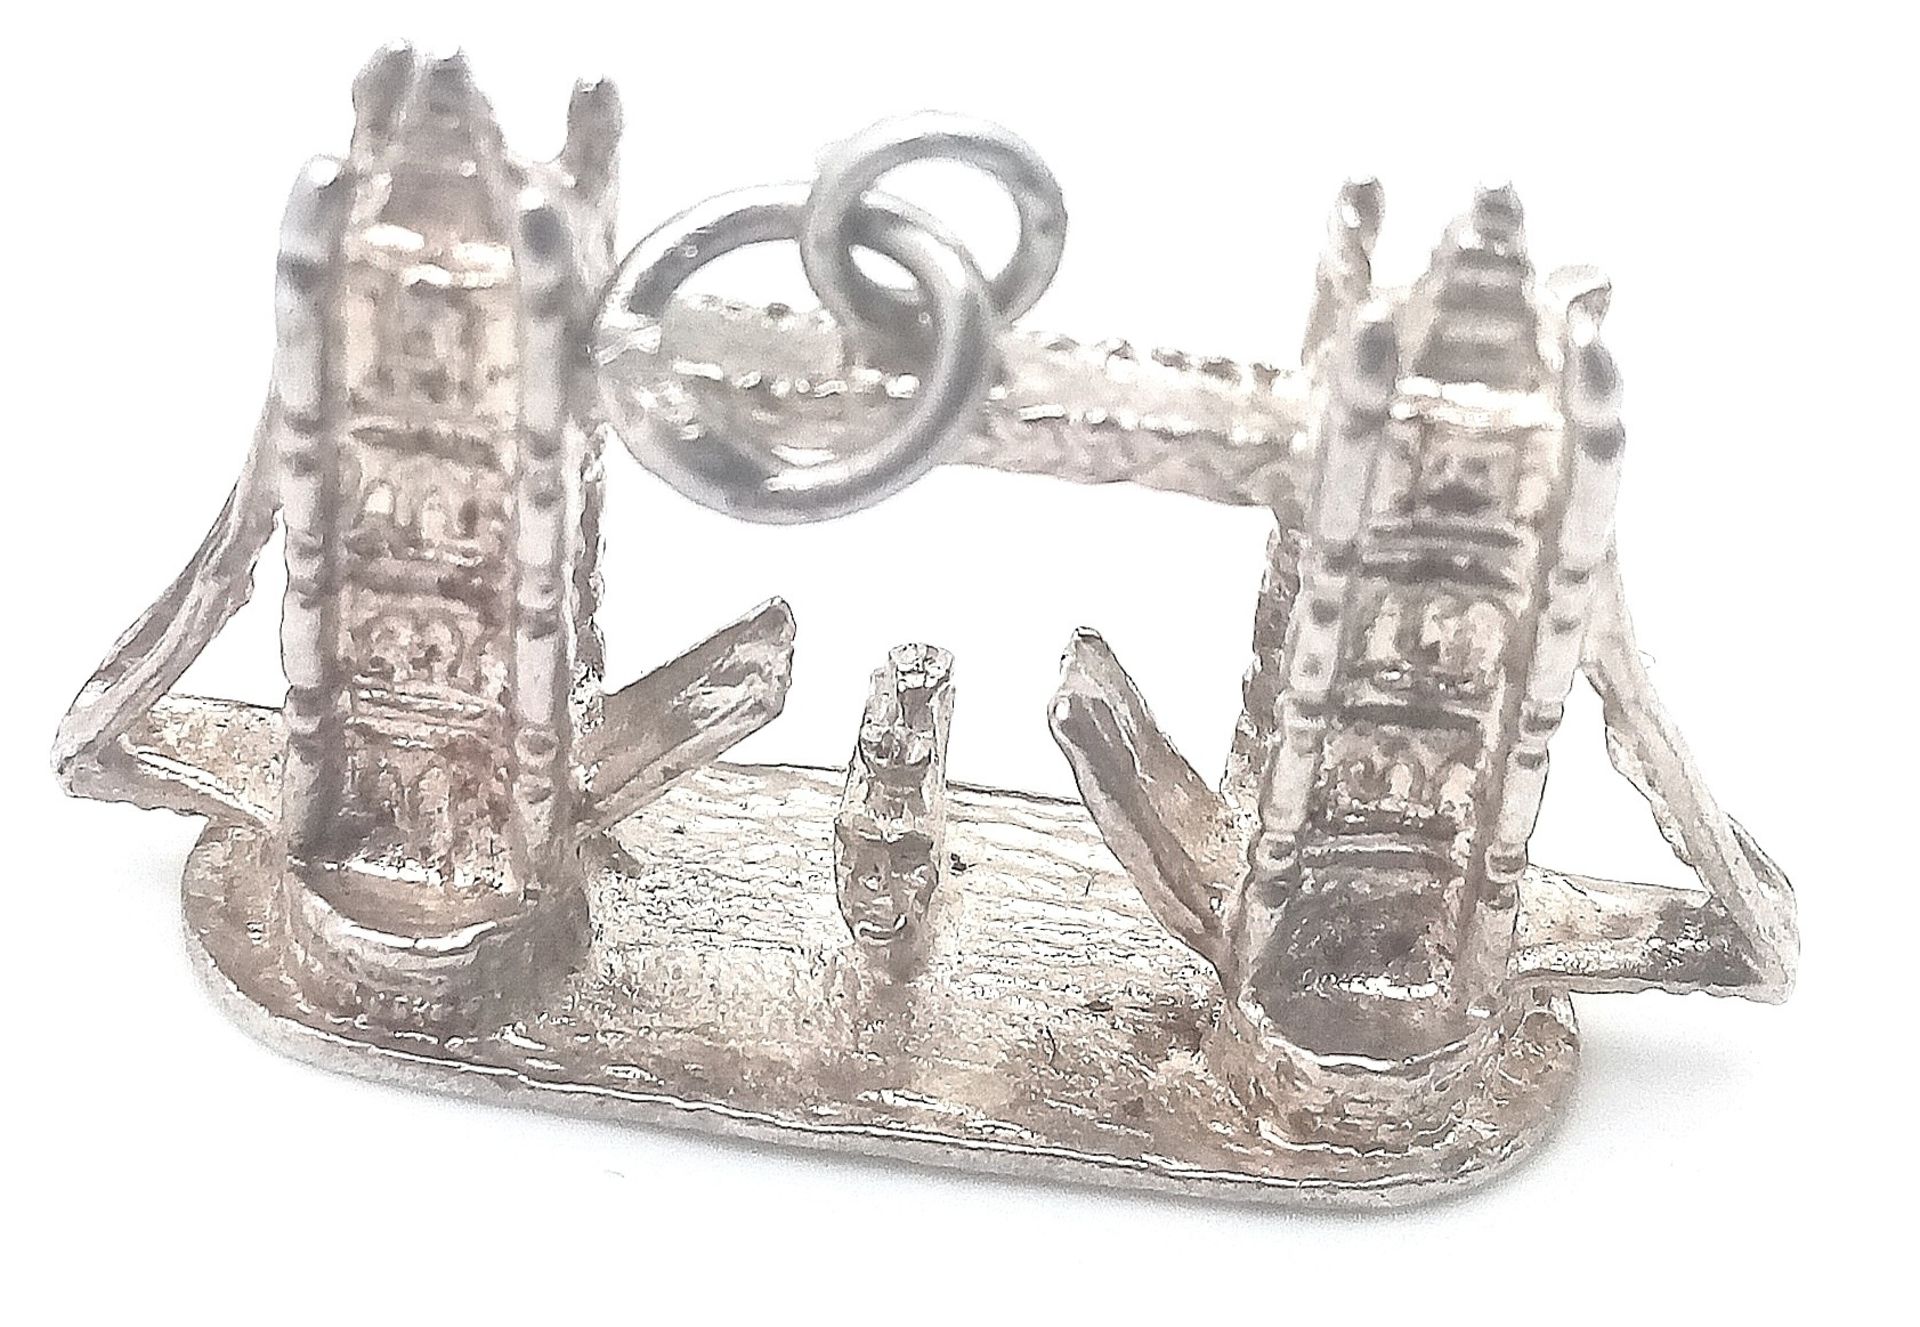 A STERLING SILVER LONDON THEMED TOWER BRIDGE CHARM/PENDANT. 3cm x 2.1cm, 6.5g weight. Ref: SC 8102 - Image 5 of 5